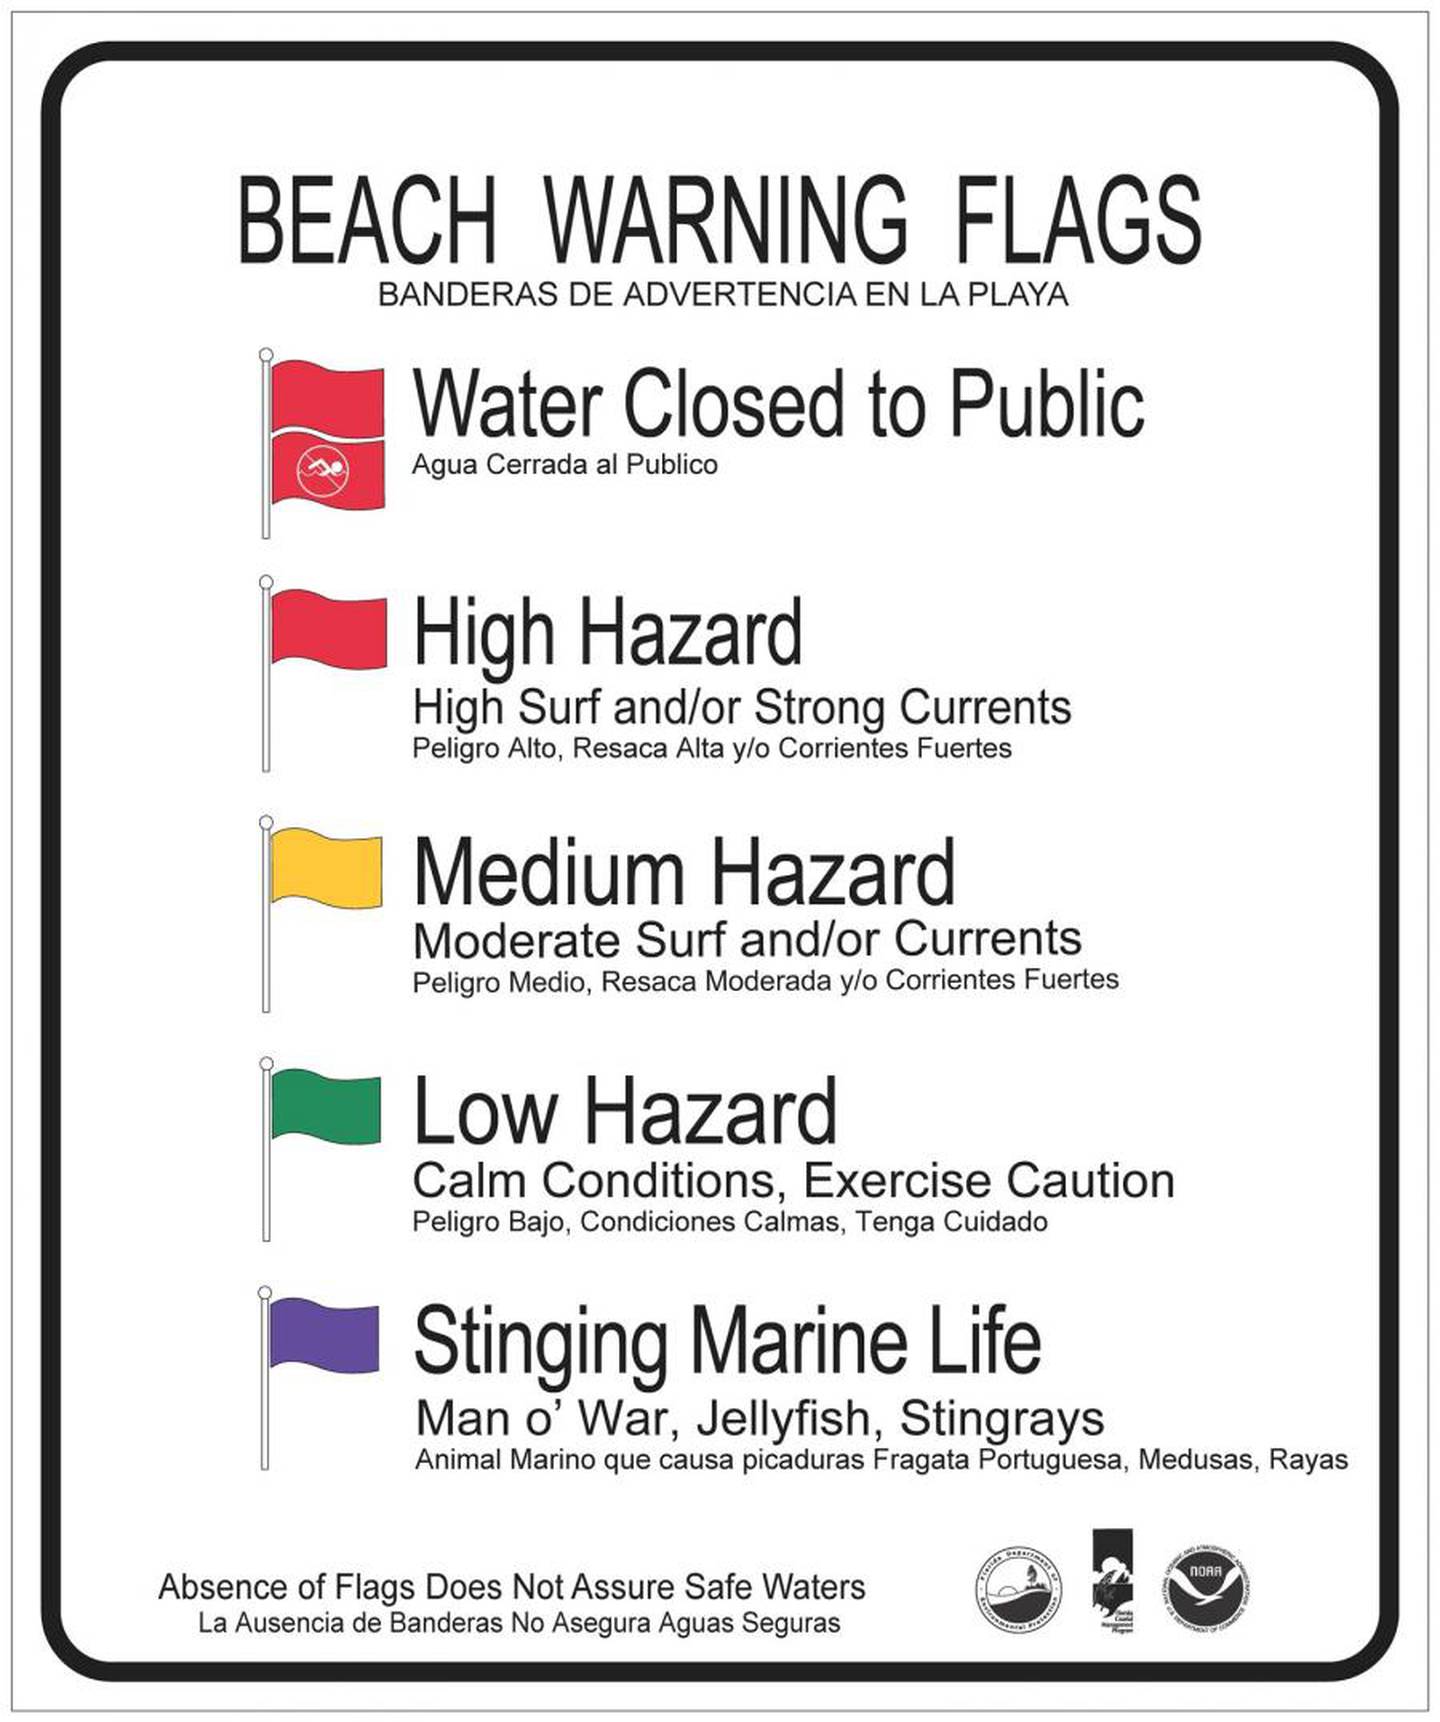 What do the warning flags mean?